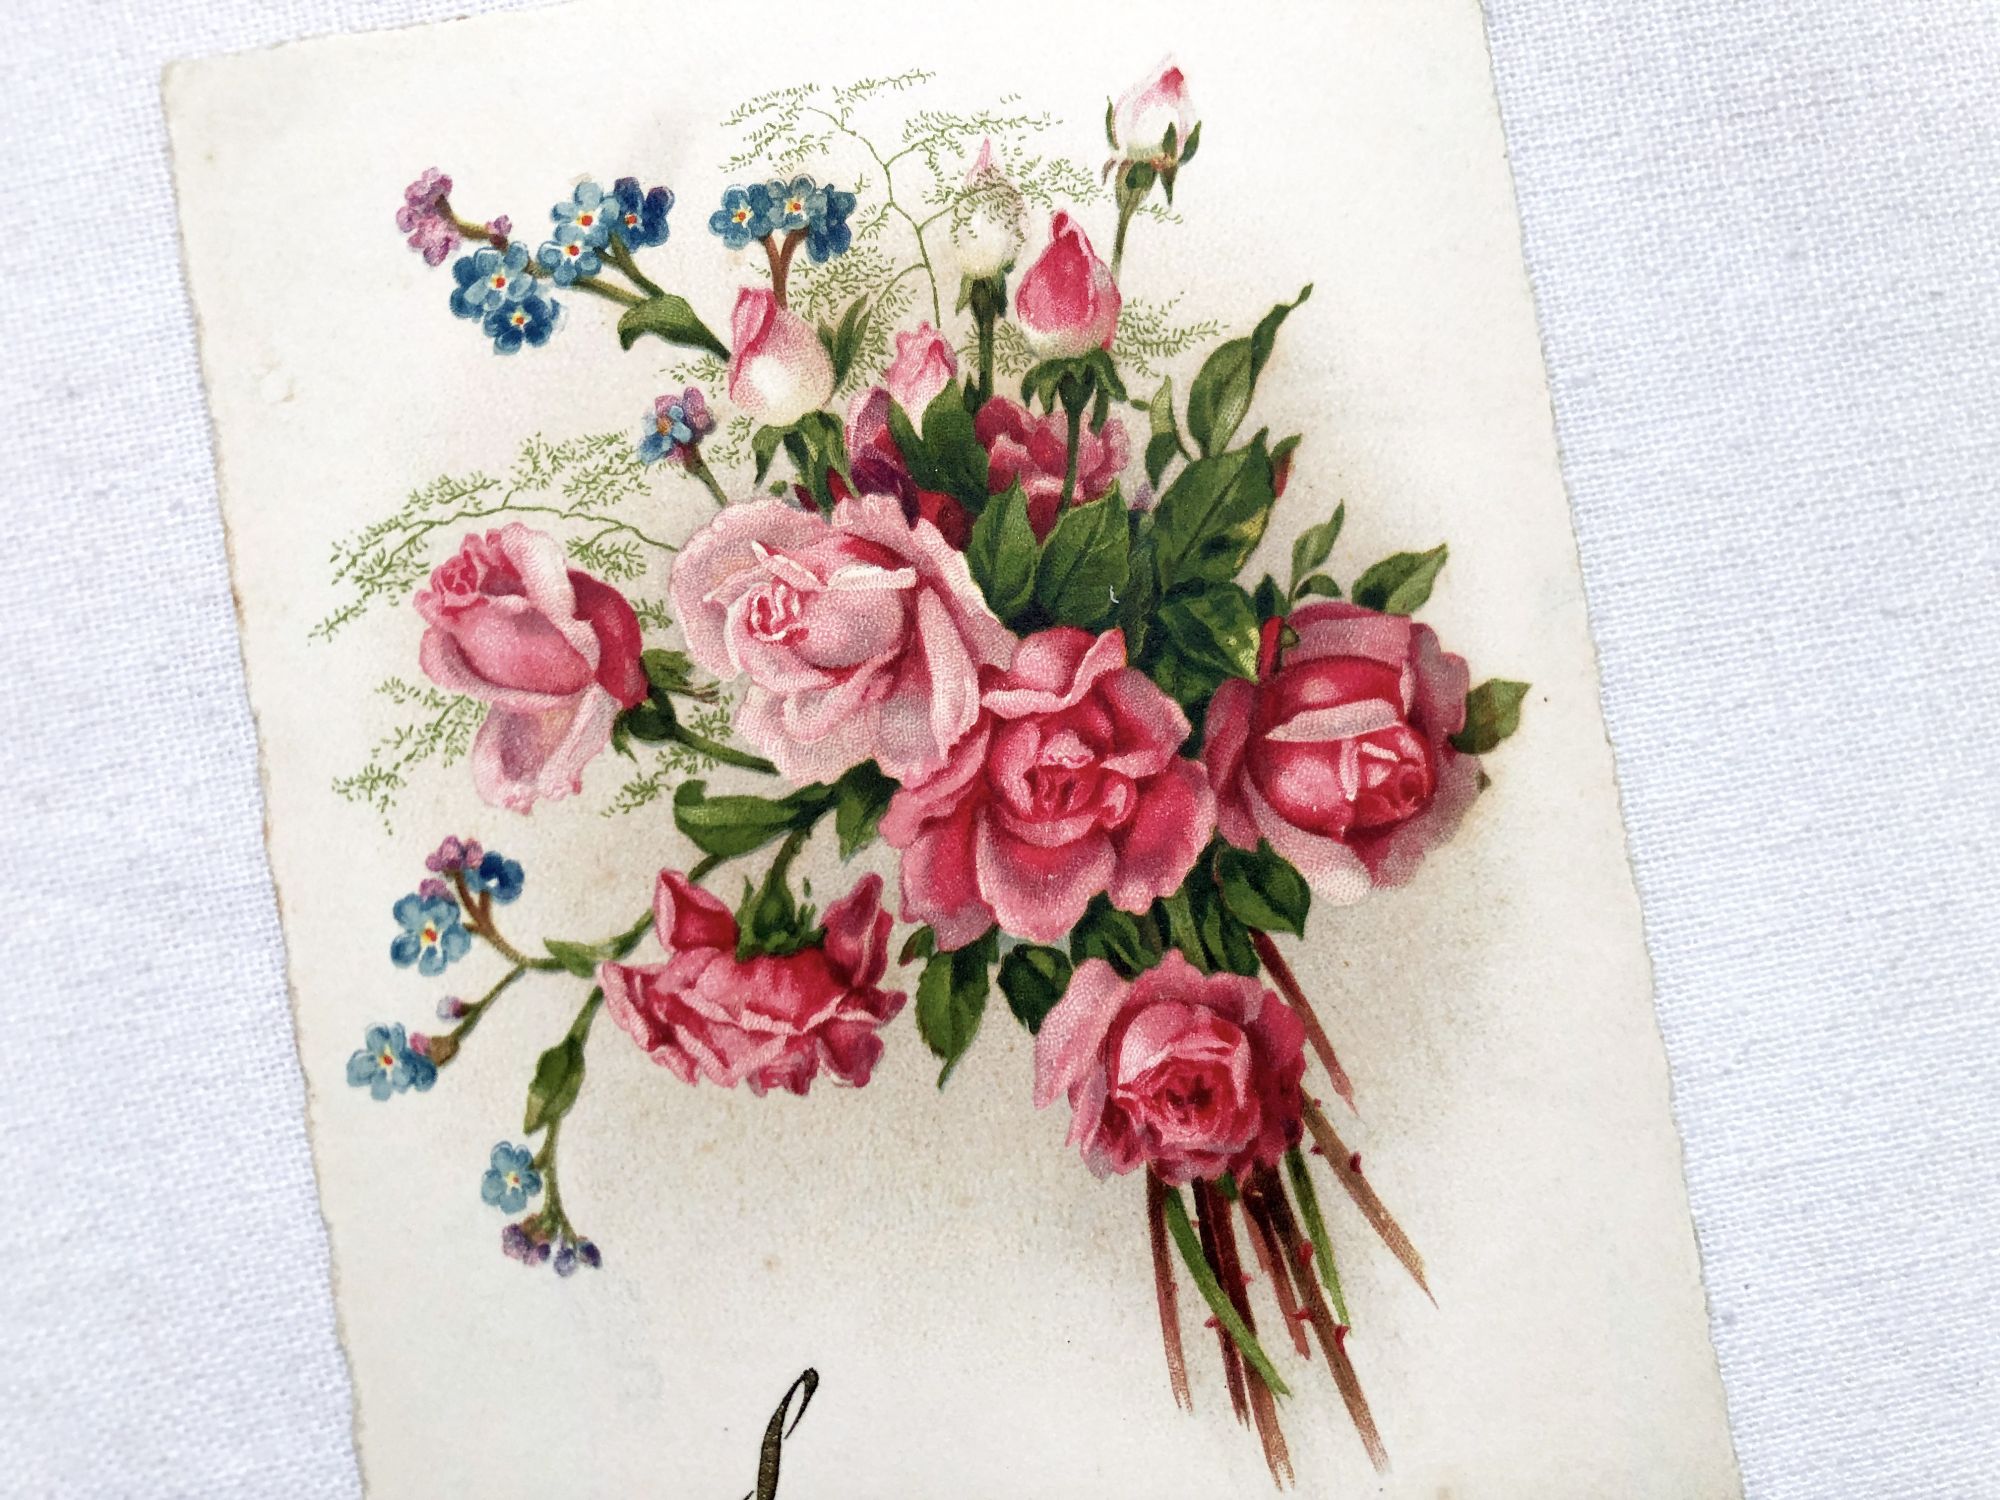 Vintage French postcard with some roses from 1940s